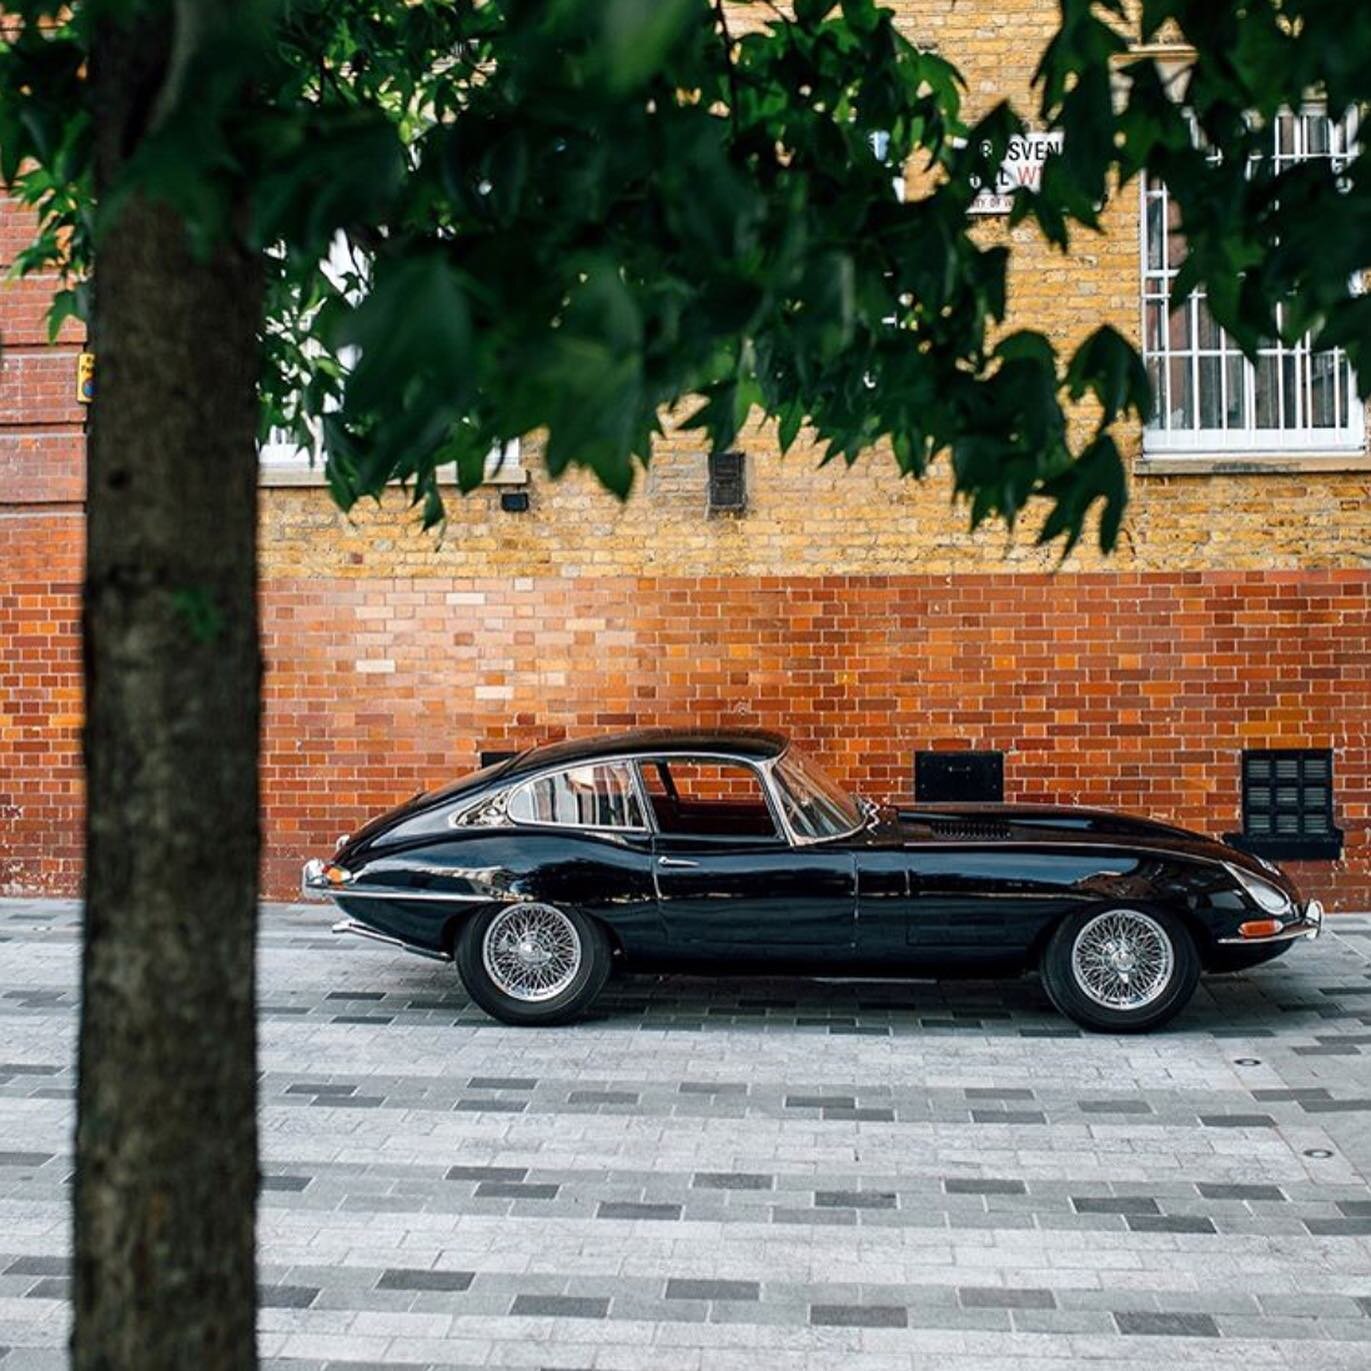 Tell me where you&rsquo;d drive to in this classy Jaguar E-Type. 

📷: @lorenzcollection 

#oldmoney #oldmoneysociety #luxurycars #classiccars #wealth #jaguaretype